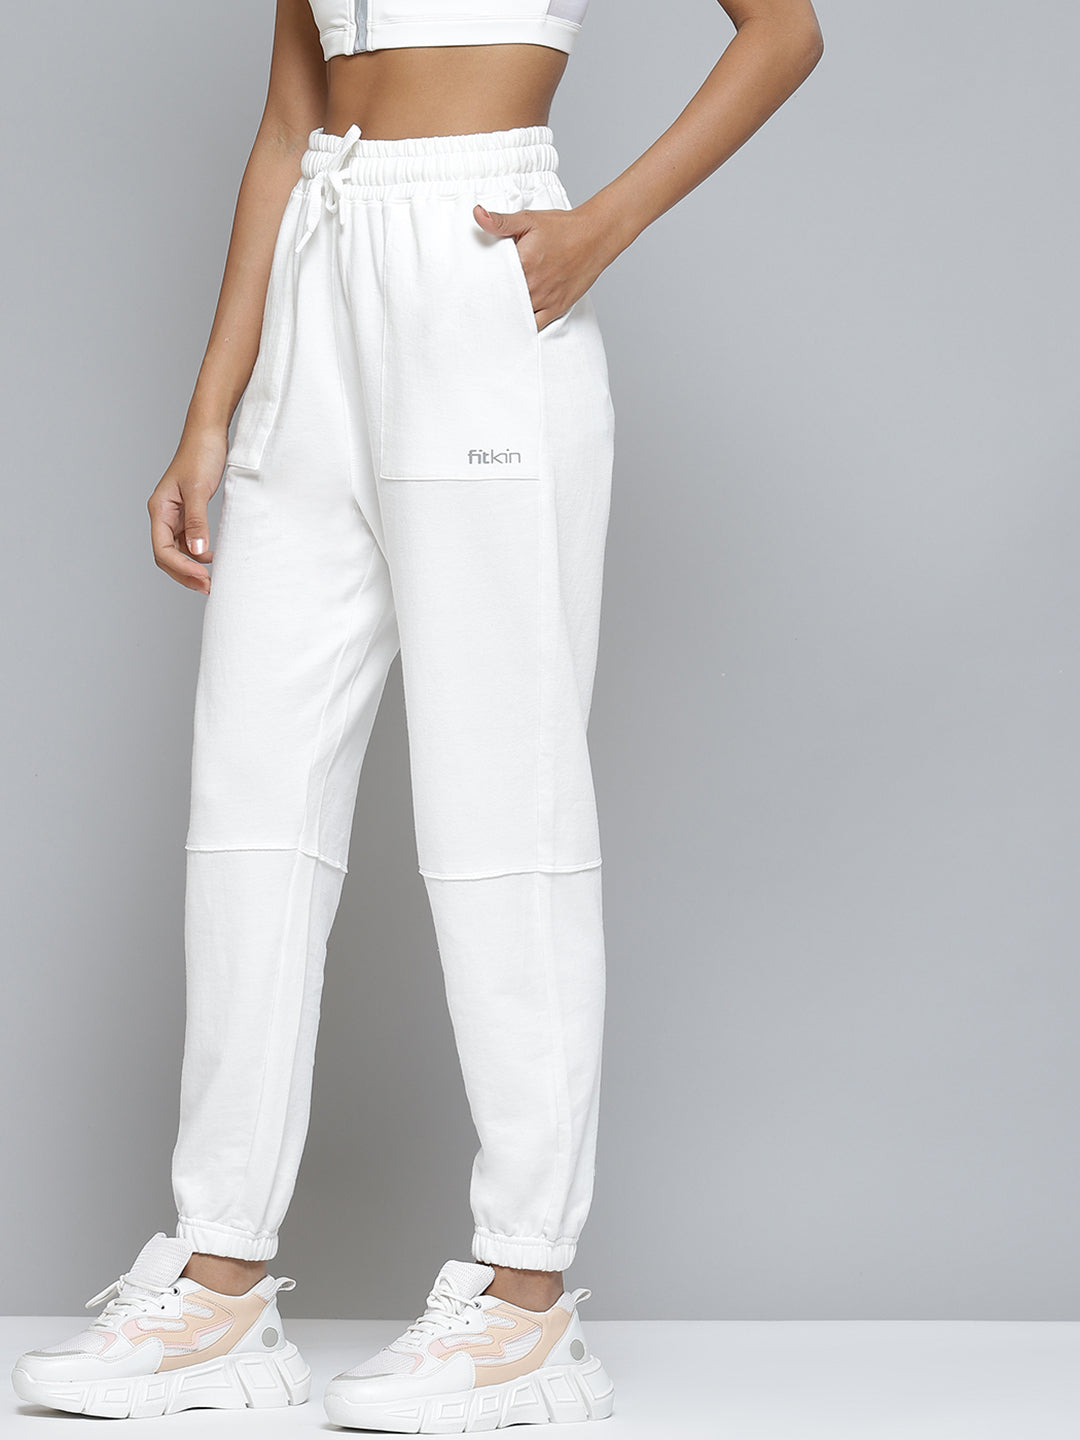 Buy AND White Solid Loose Fit Cotton Womens Trousers